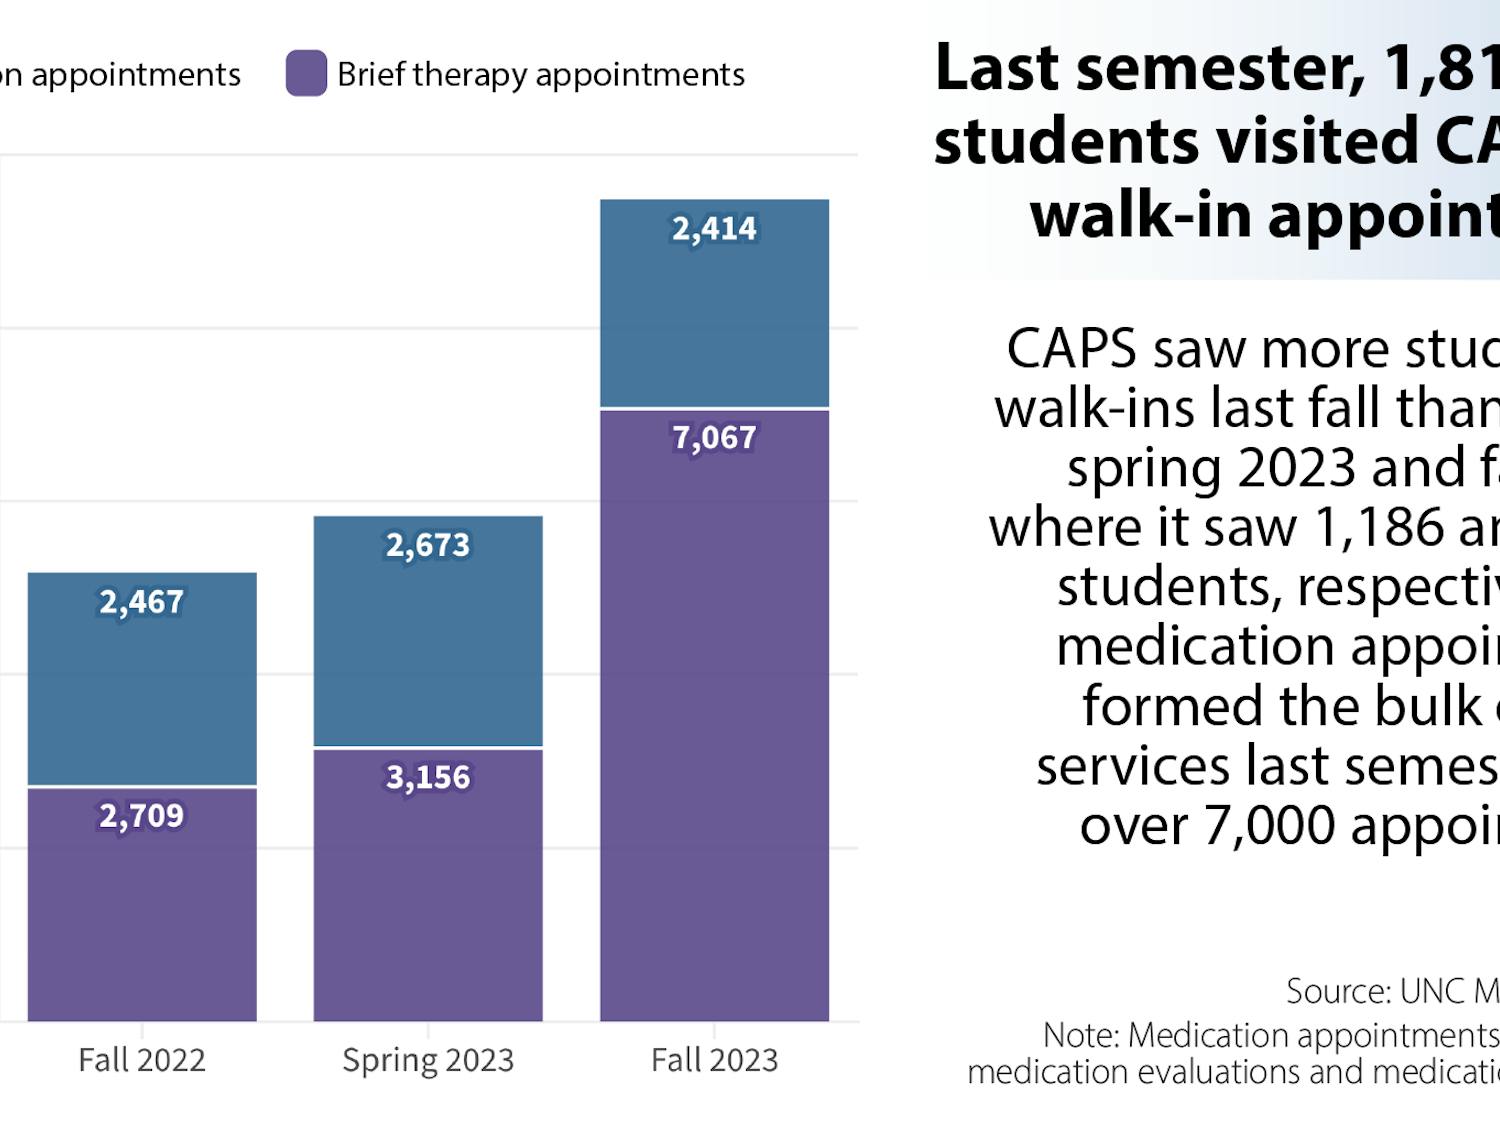 Visualization: Last semester, 1,812 UNC students visited CAPS for walk-in appointments